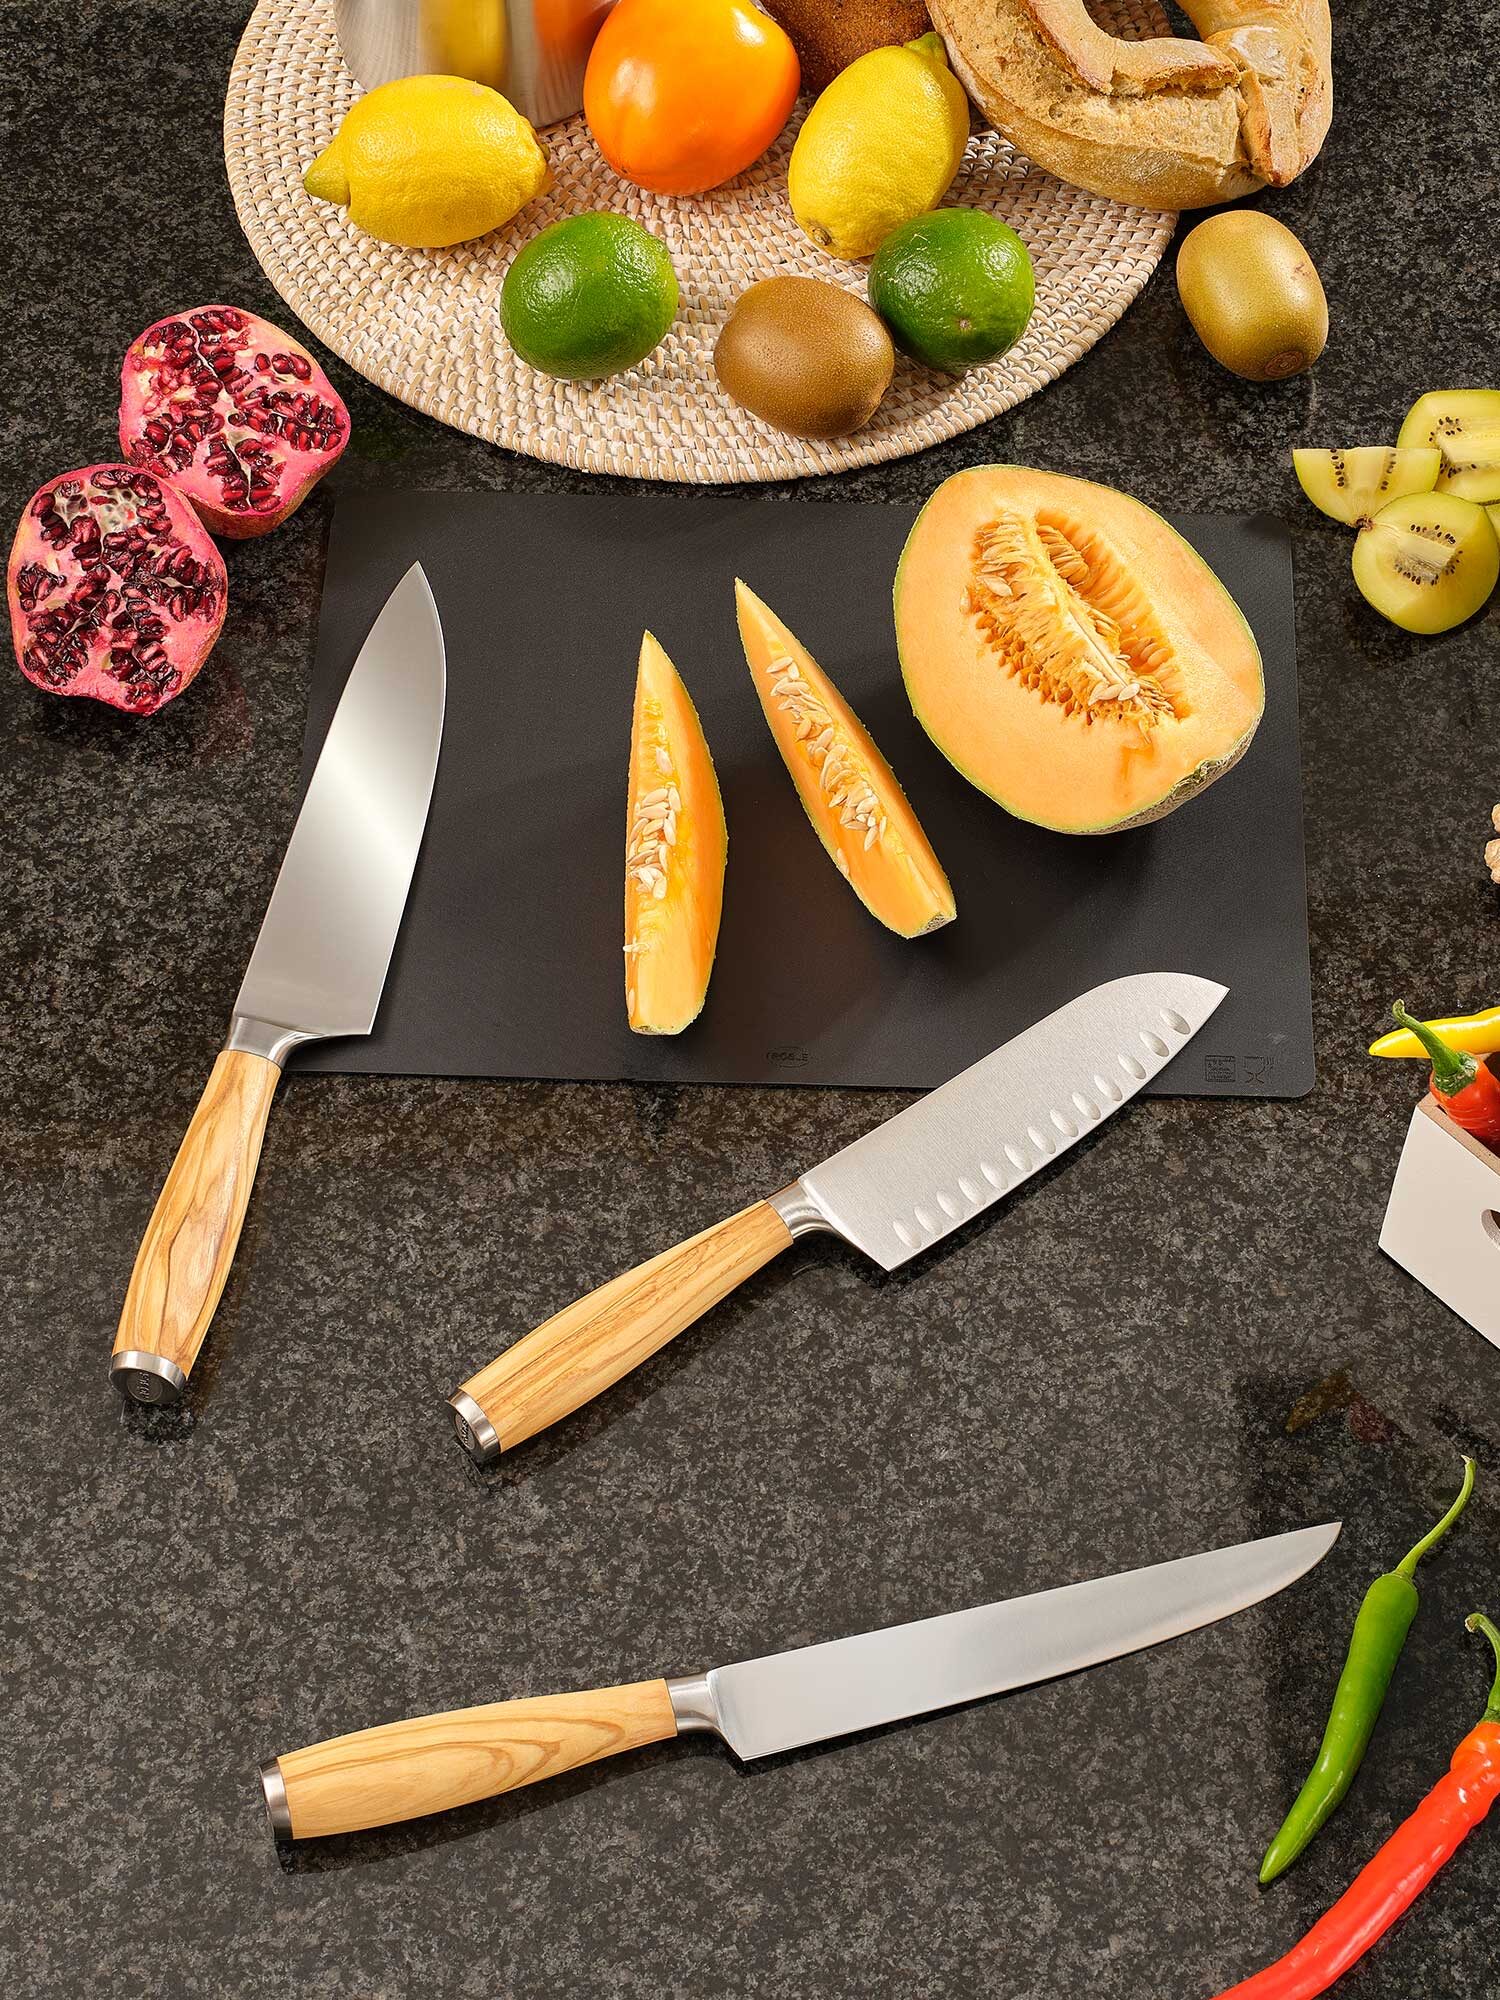 Kitchen counter with various fruits, vegetables, and a set of knives with wooden handles.